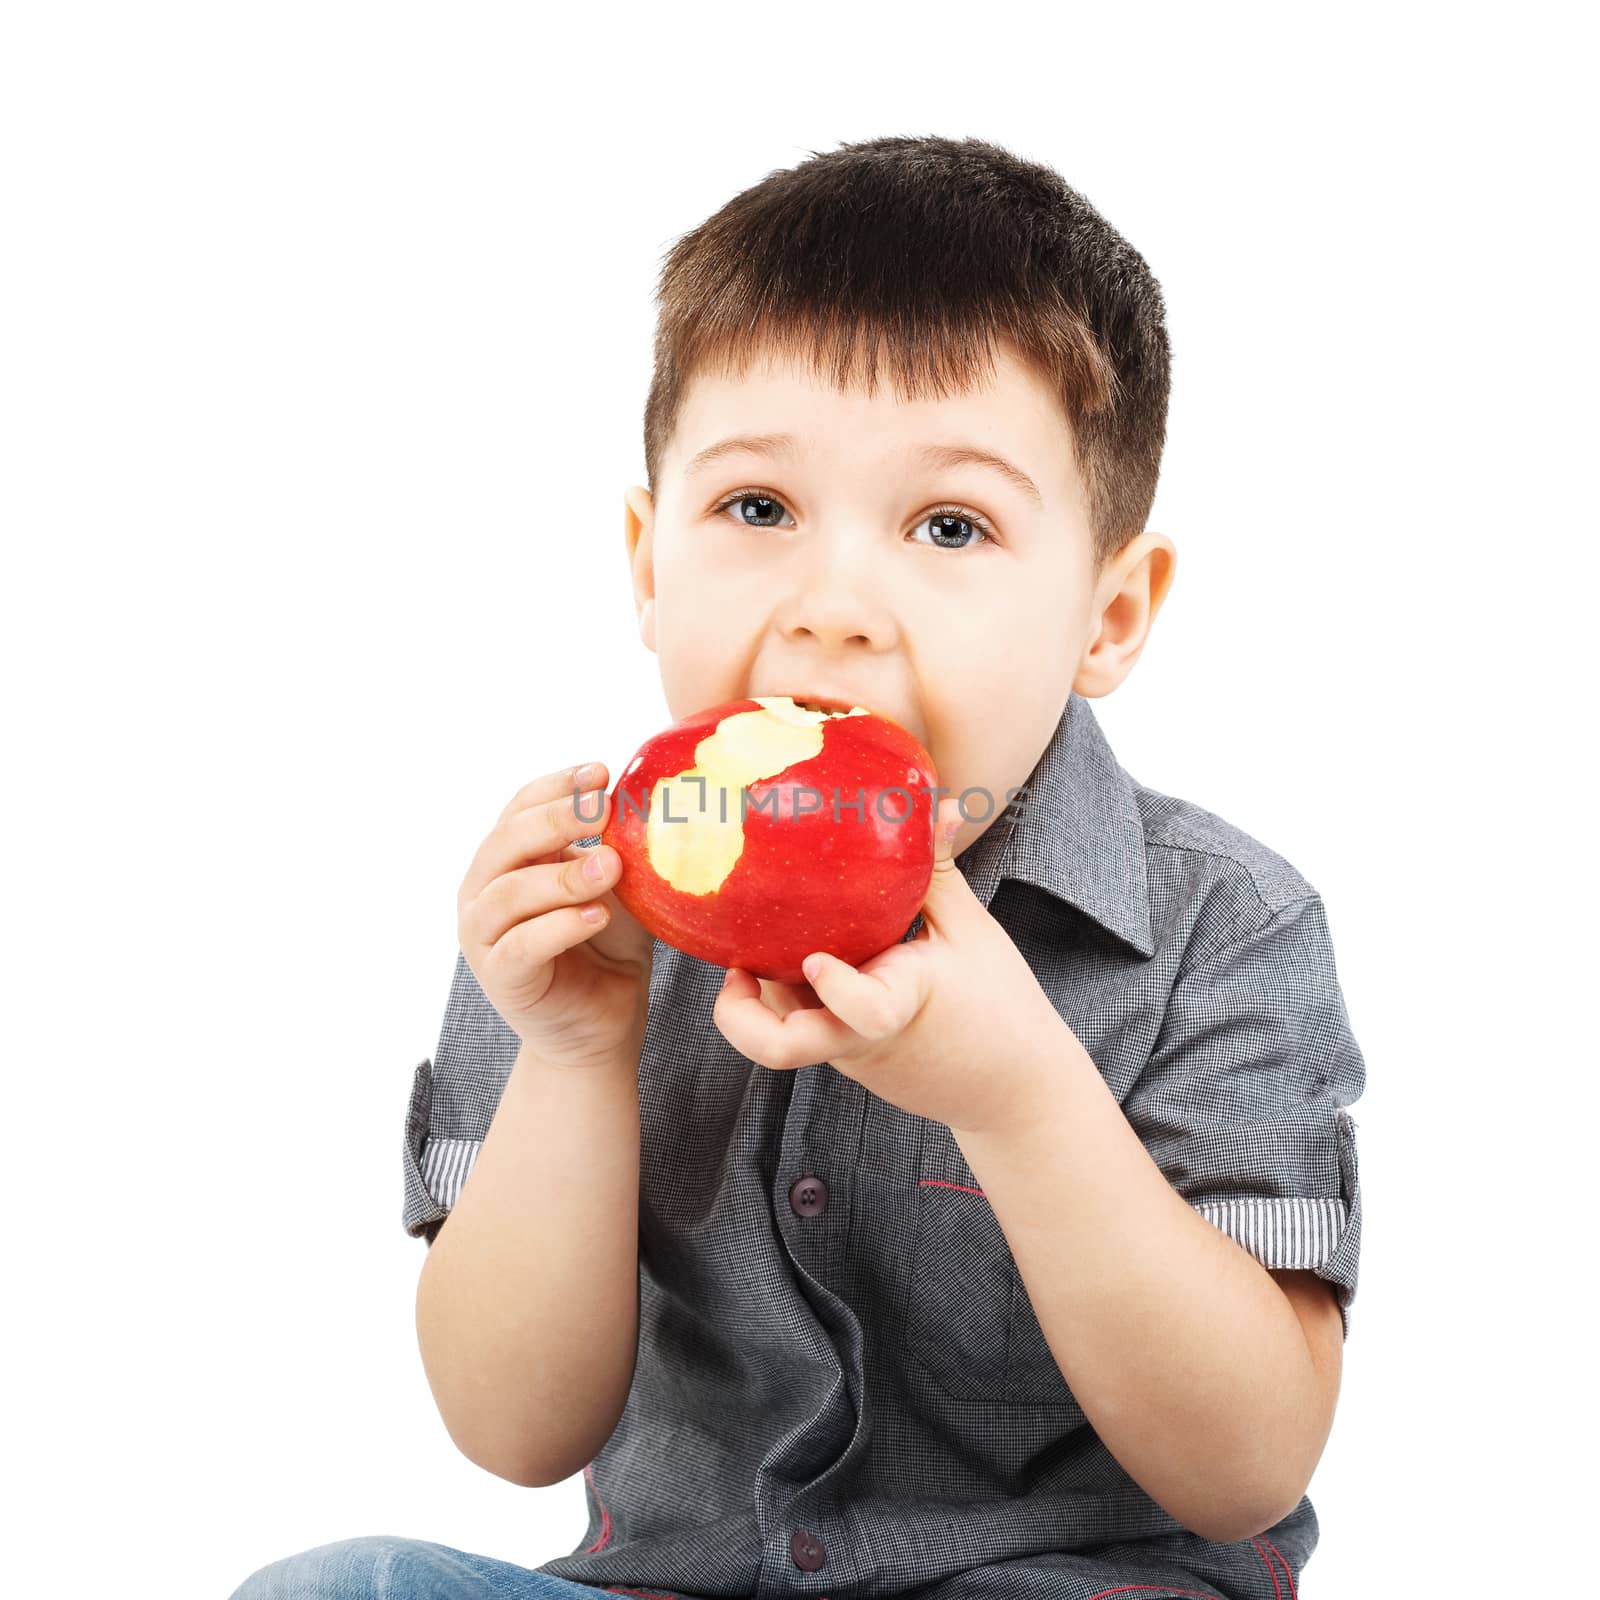 Close-up portrait of a little boy eating red apple isolated on white background